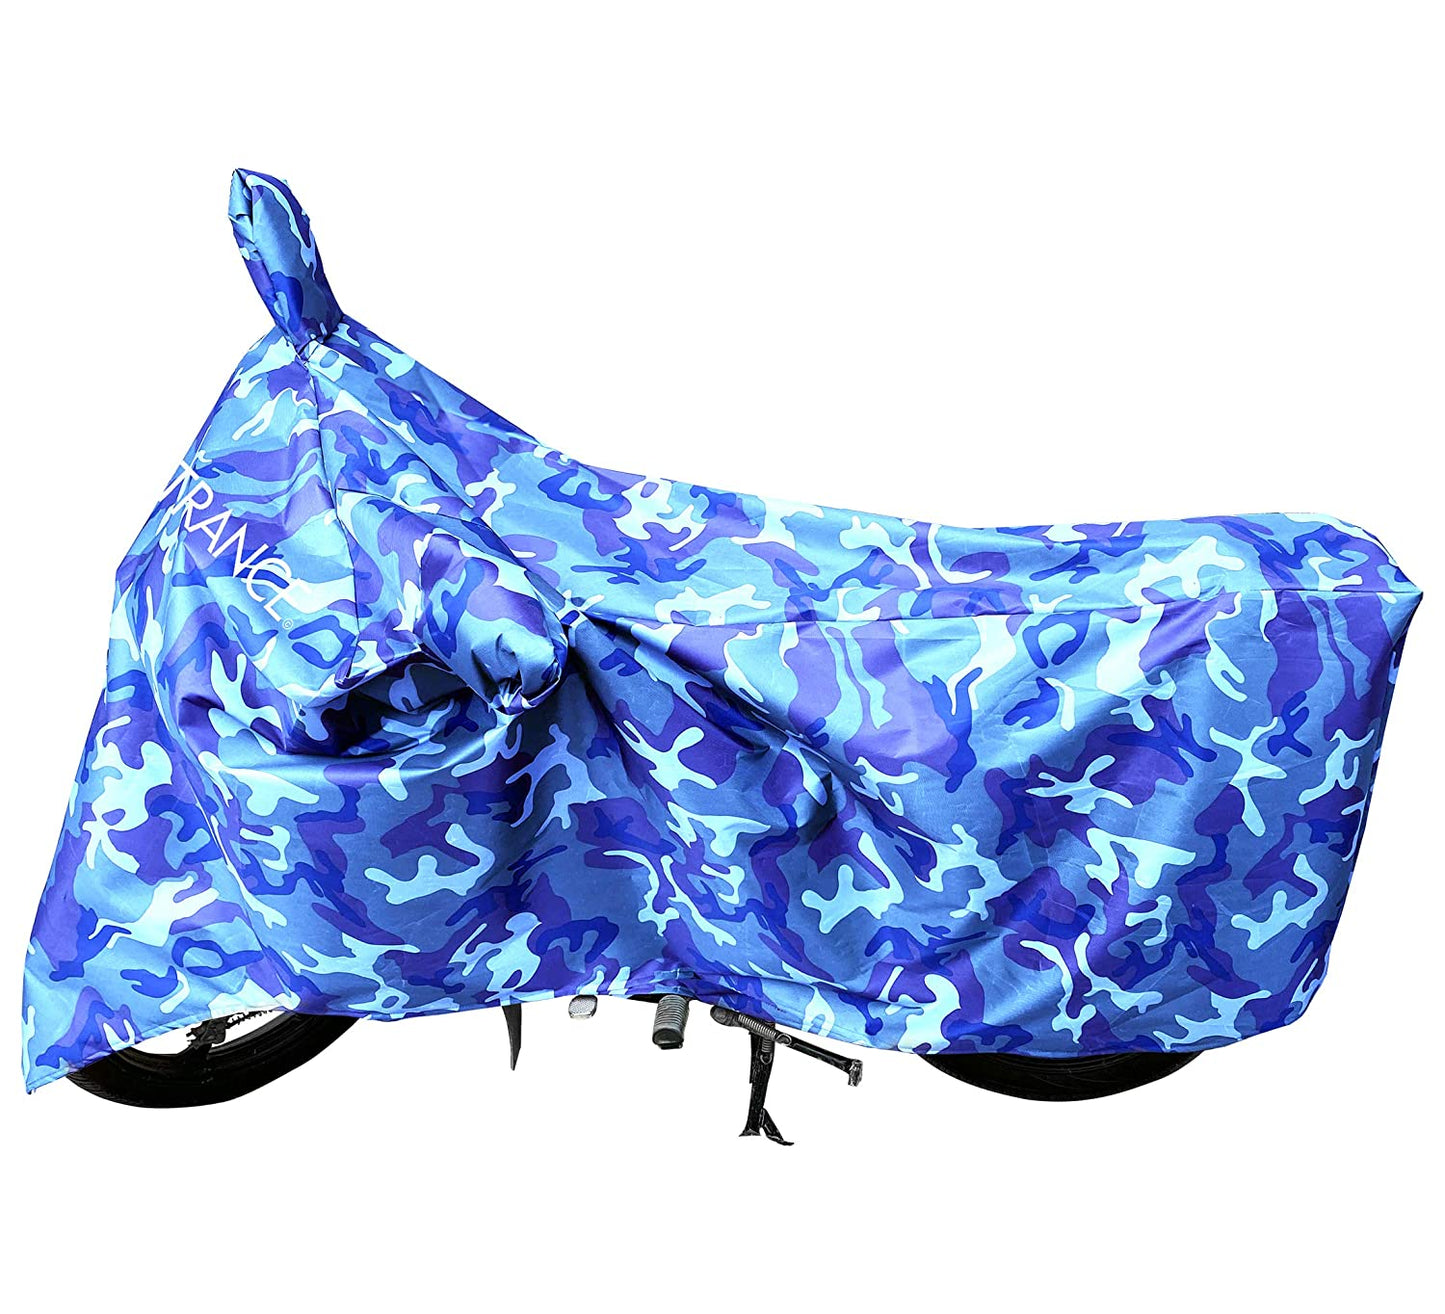 MotoTrance Jungle Bike Body Covers For Bajaj Discover - Interlock-Stitched Waterproof and Heat Resistant with Mirror Pockets